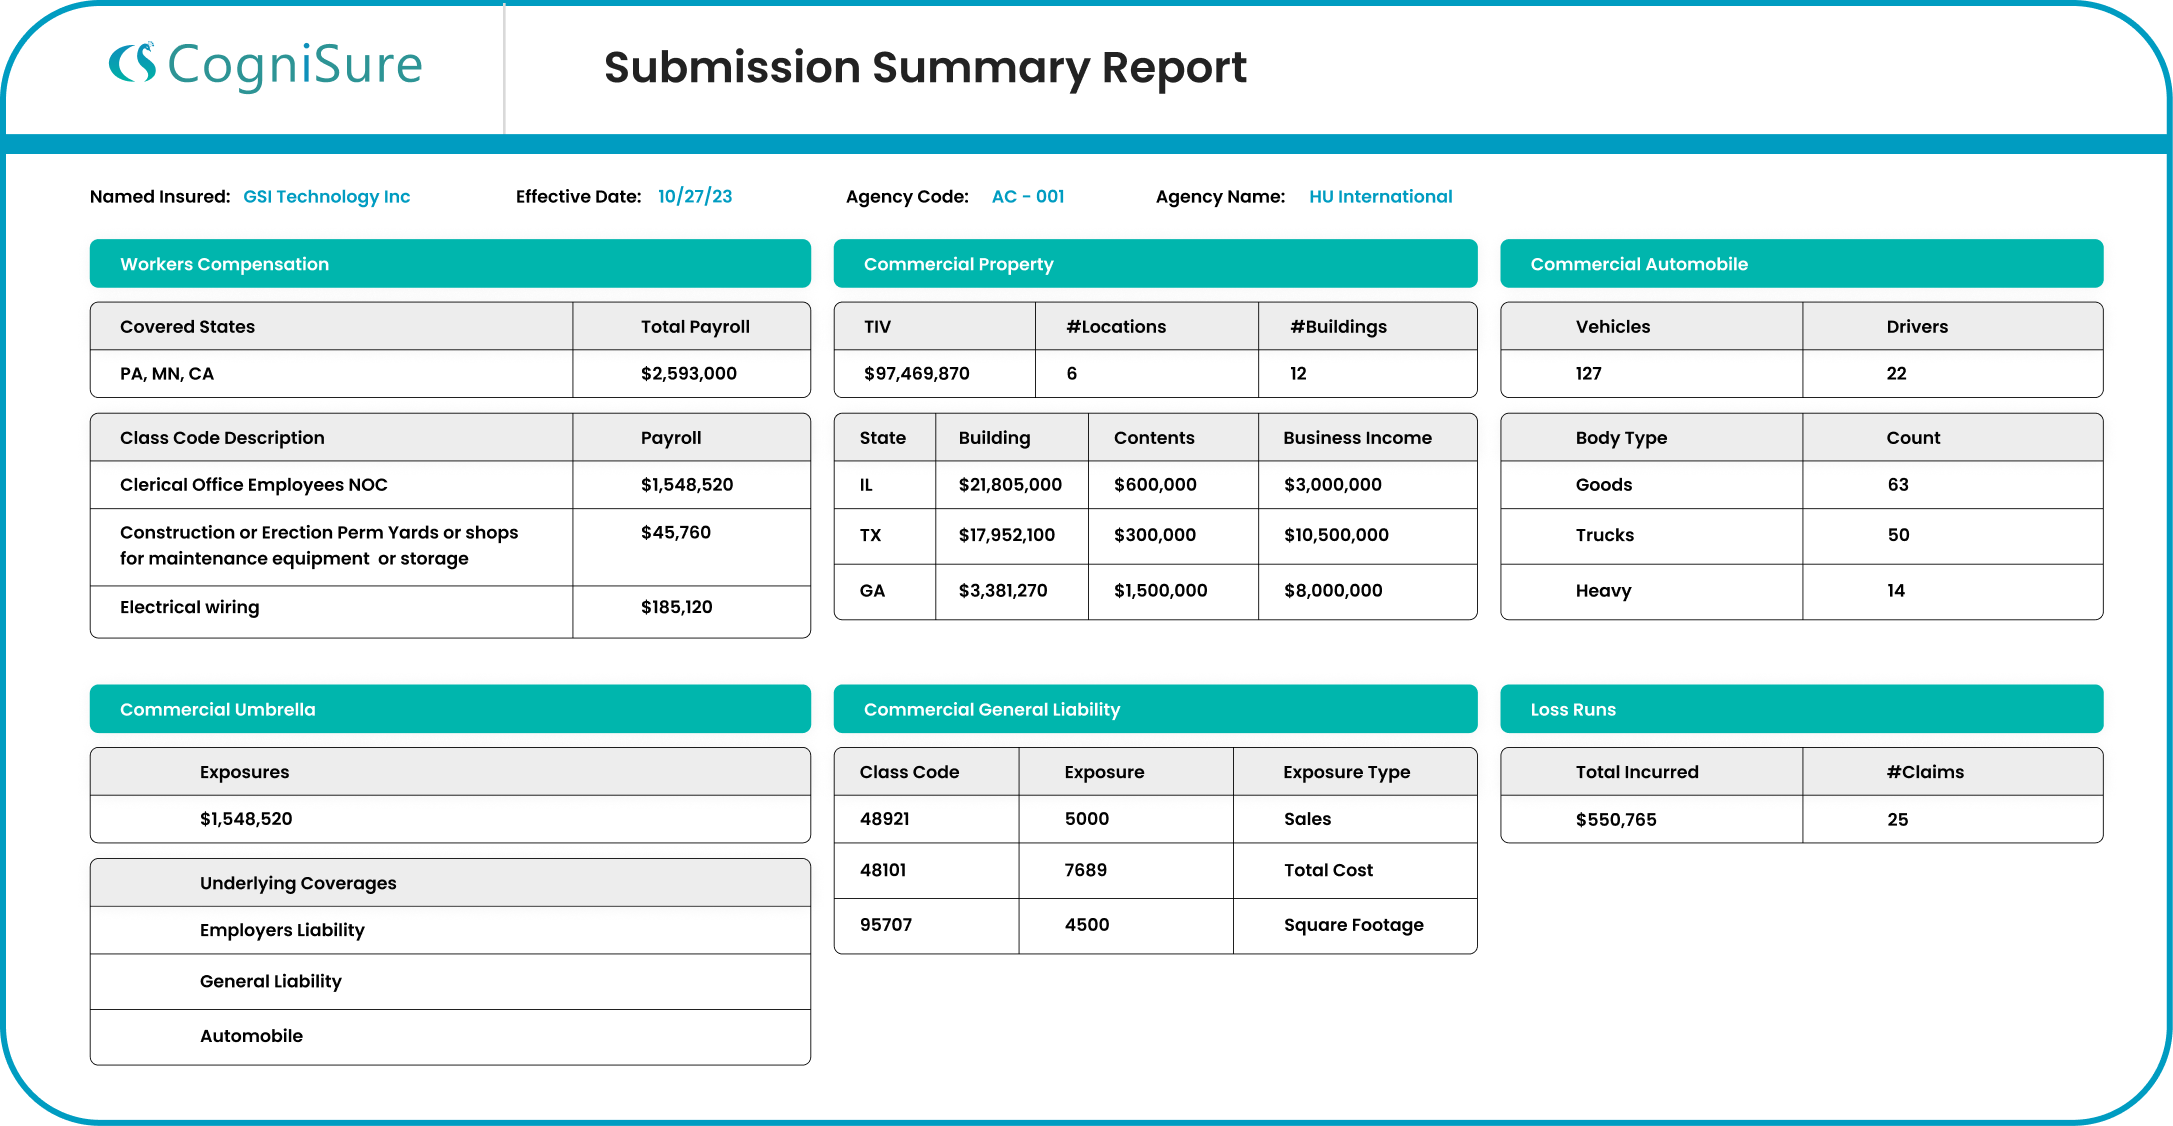 Submission Summary Report